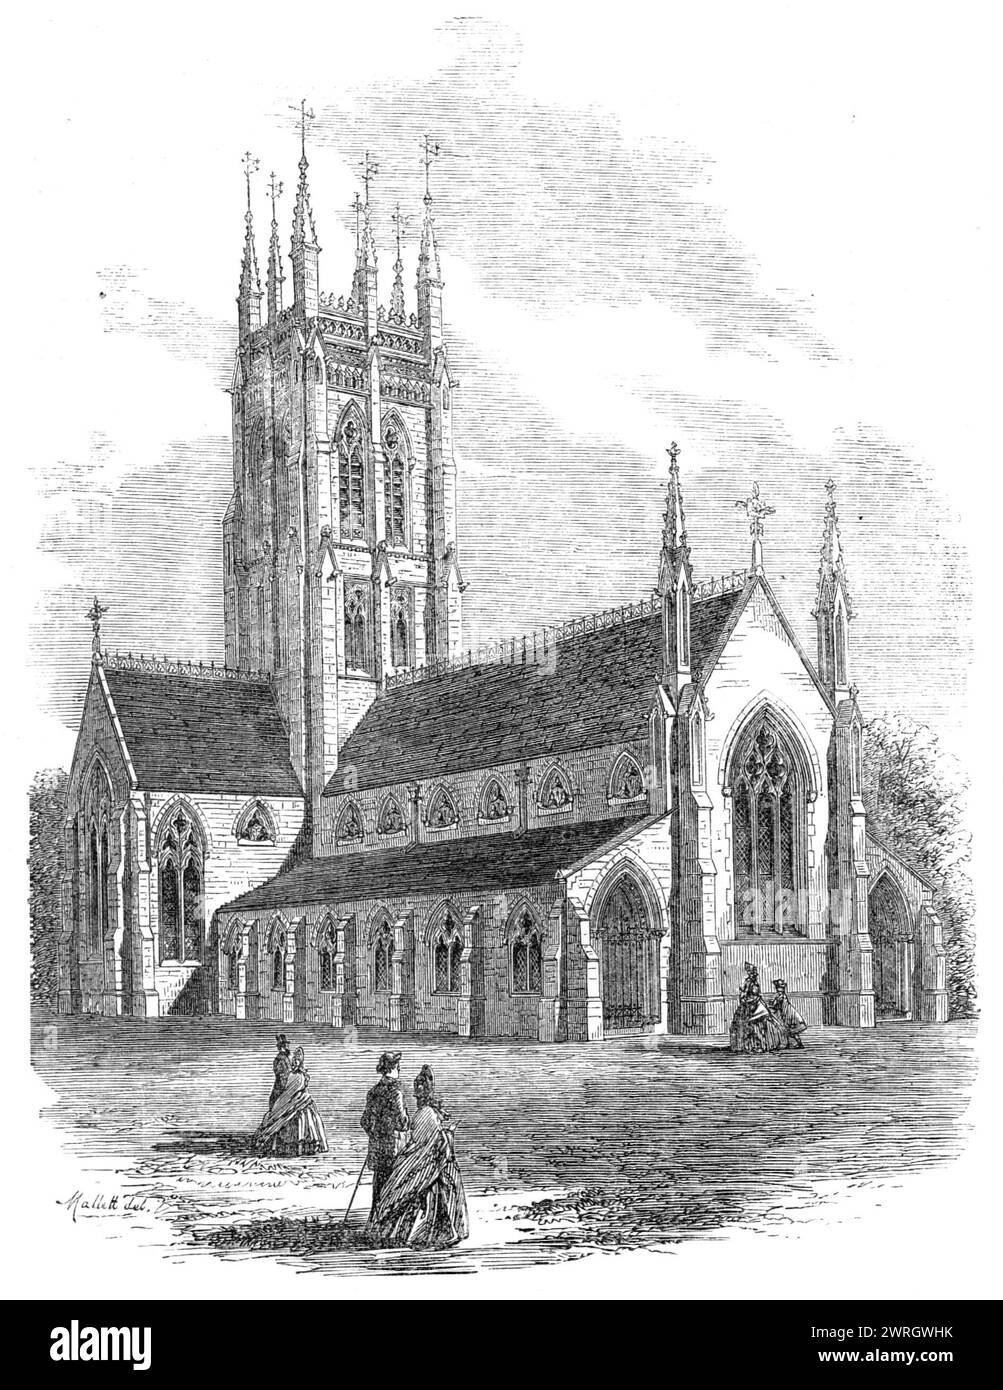 St. Saviour's Church, Clapham, [London], 1864. 'The new church in Cedars-road, Clapham-common was built by the Rev. Wentworth Bowyer, Rector of Clapham, at a cost of about &#xa3;10,000. The architect is Mr. James Knowles, jun. The style is Second Pointed. The building is cruciform, its length being 120ft. and its width 49 ft.; while the length of the transepts is 77 ft. It has a large central tower, 120 ft. high and 30 ft. square. The whole is built of Kentish rag, with Bath stone dressings, the interior piers being of Portland stone. The stained-glass windows are by Messrs. Clayton and Bell. Stock Photo